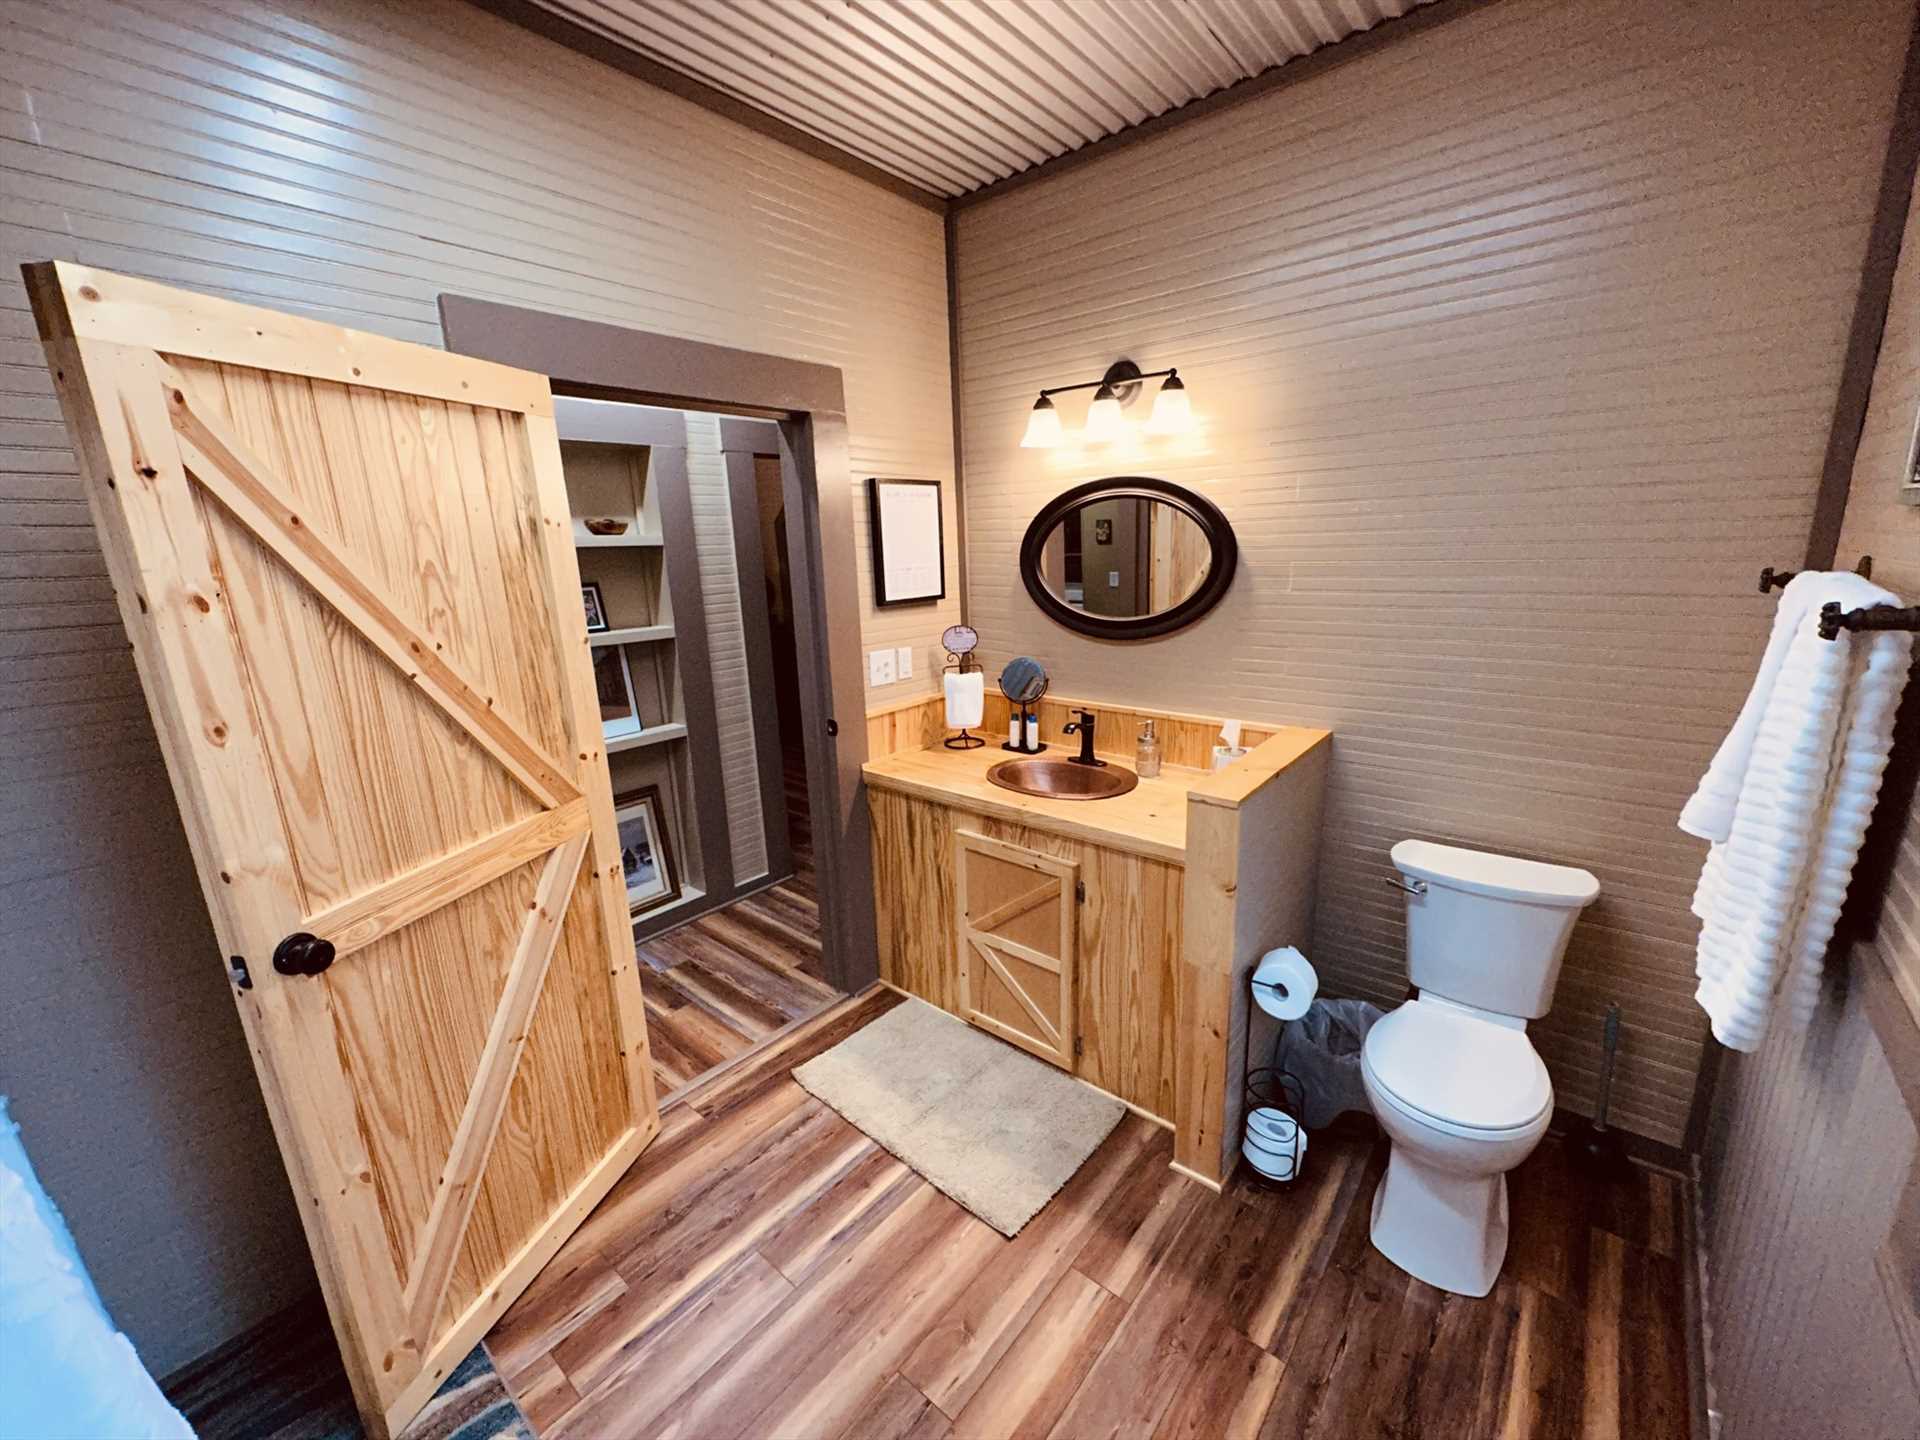                                                 Our guests love the rustic barn door style entryways and cabinets located throughout the cottage!